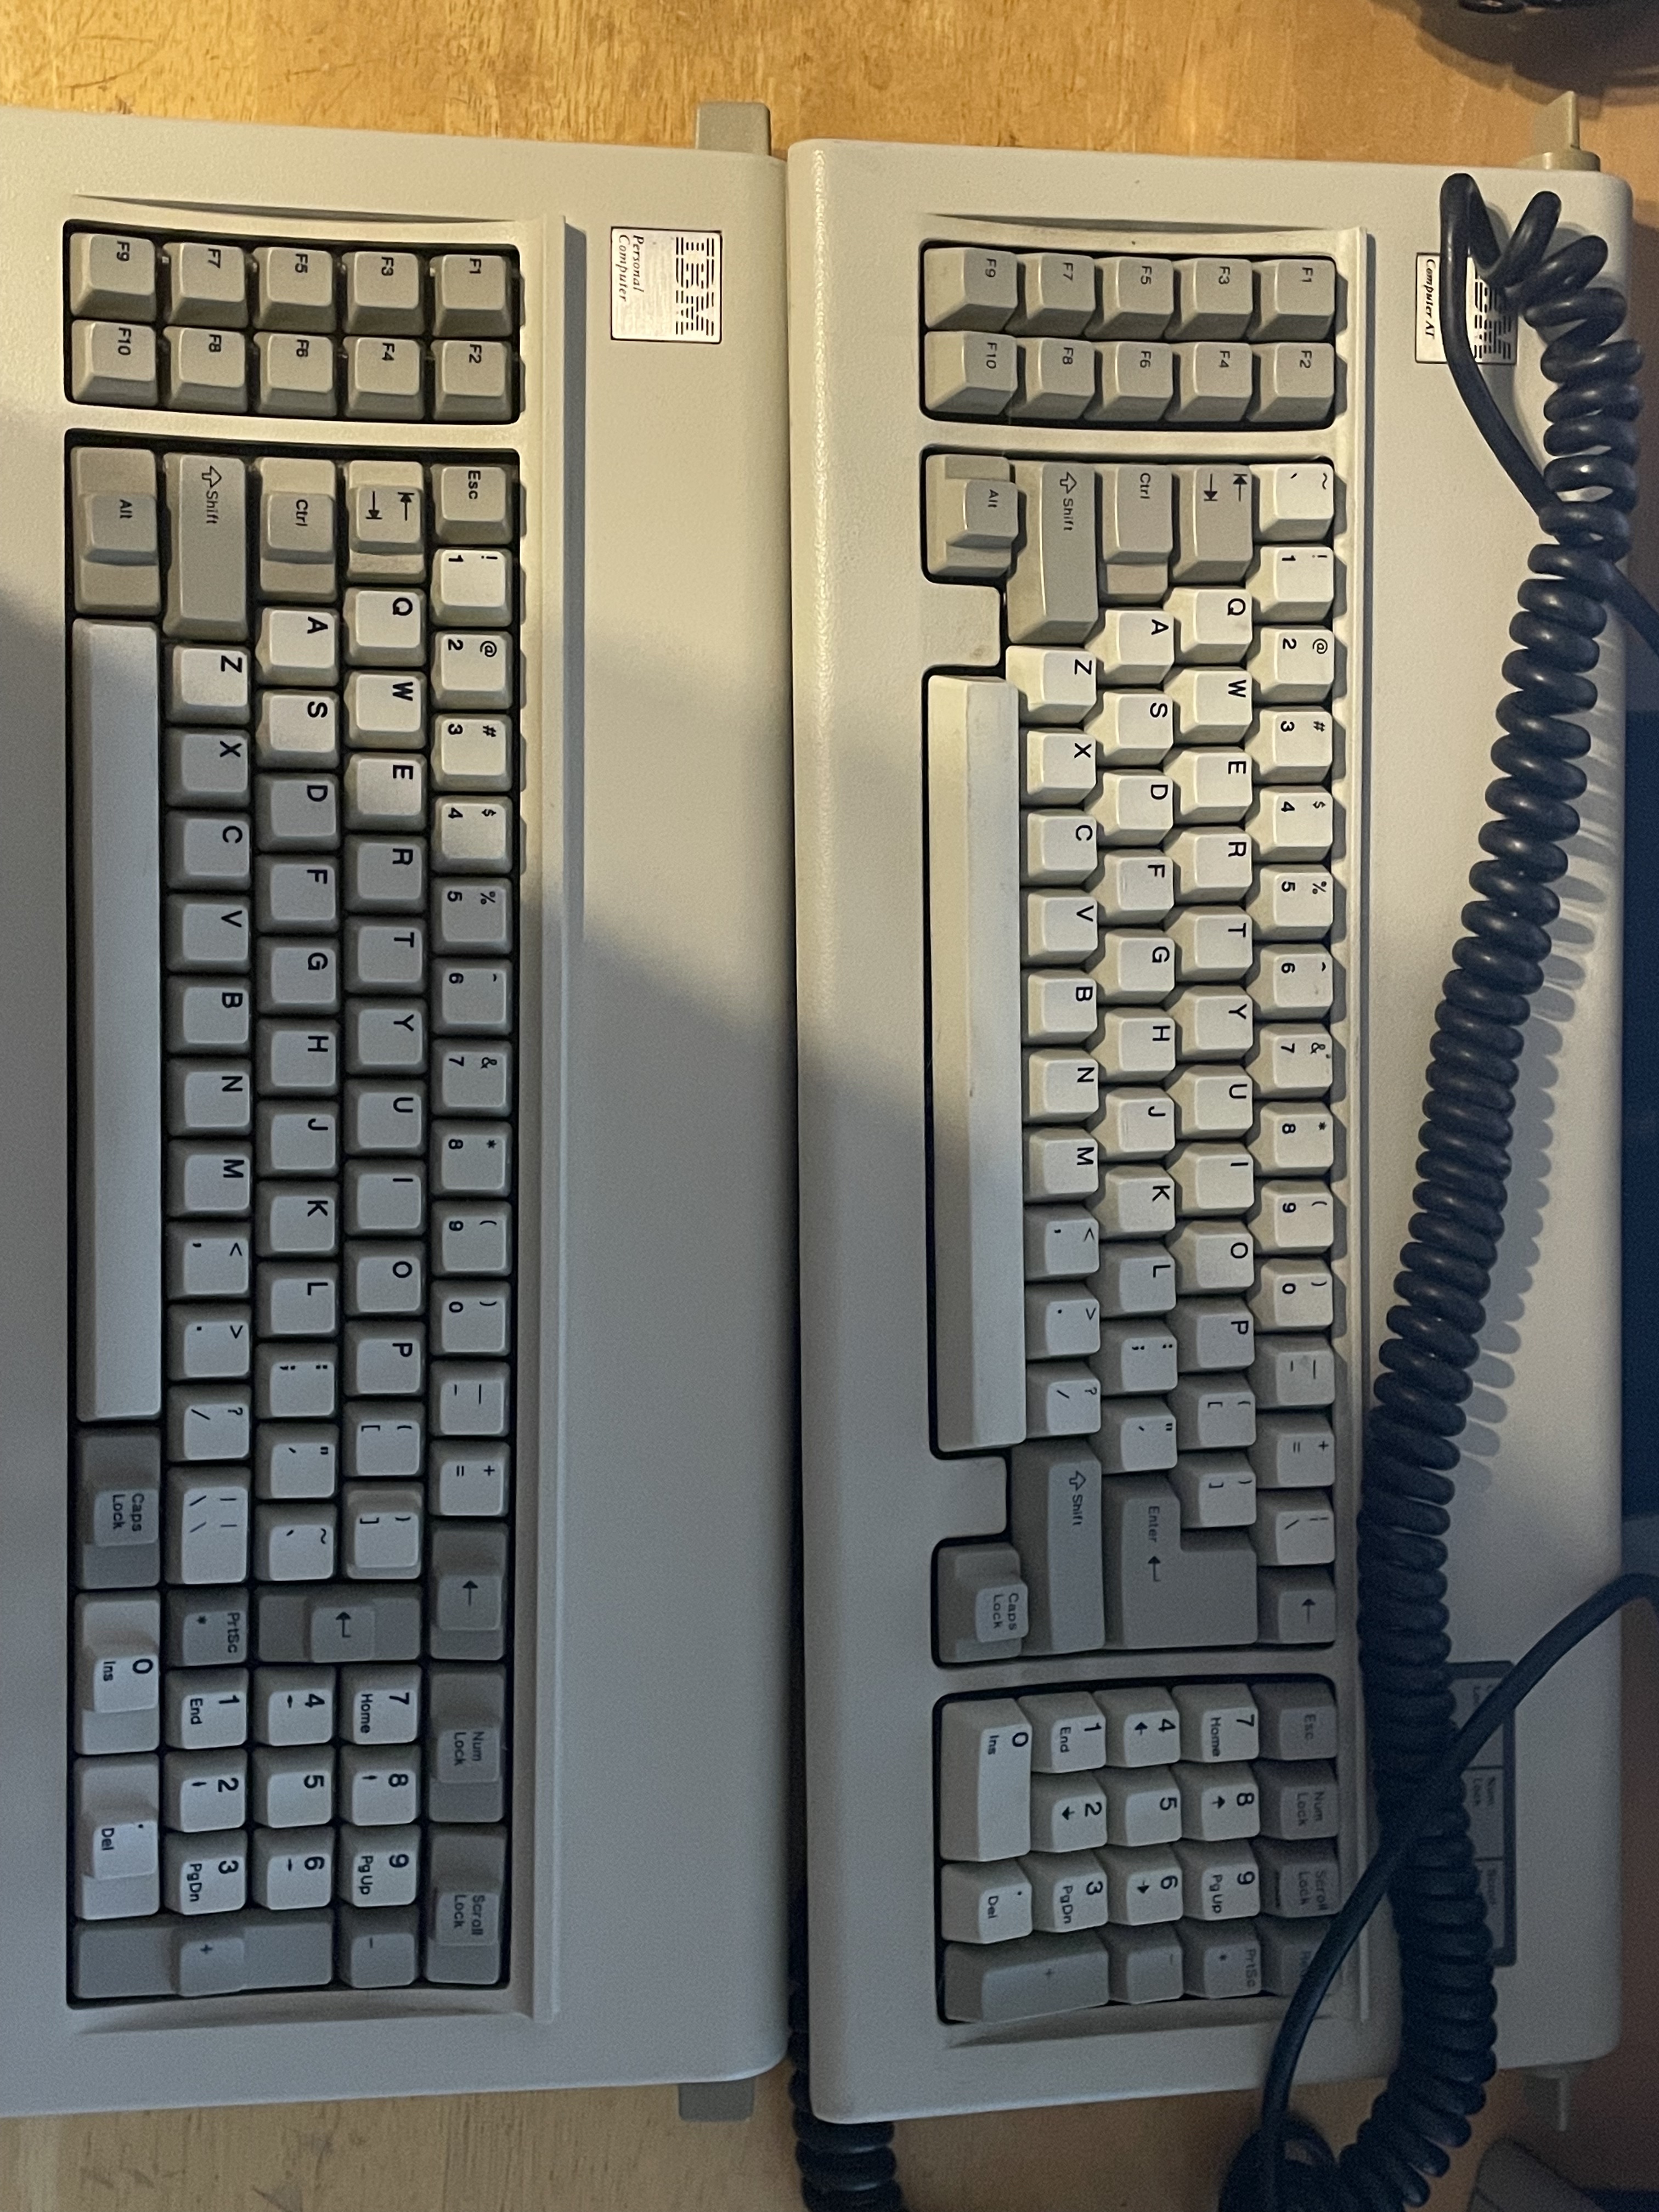 Left: XT with PCB damage after reassembly and layout modification.